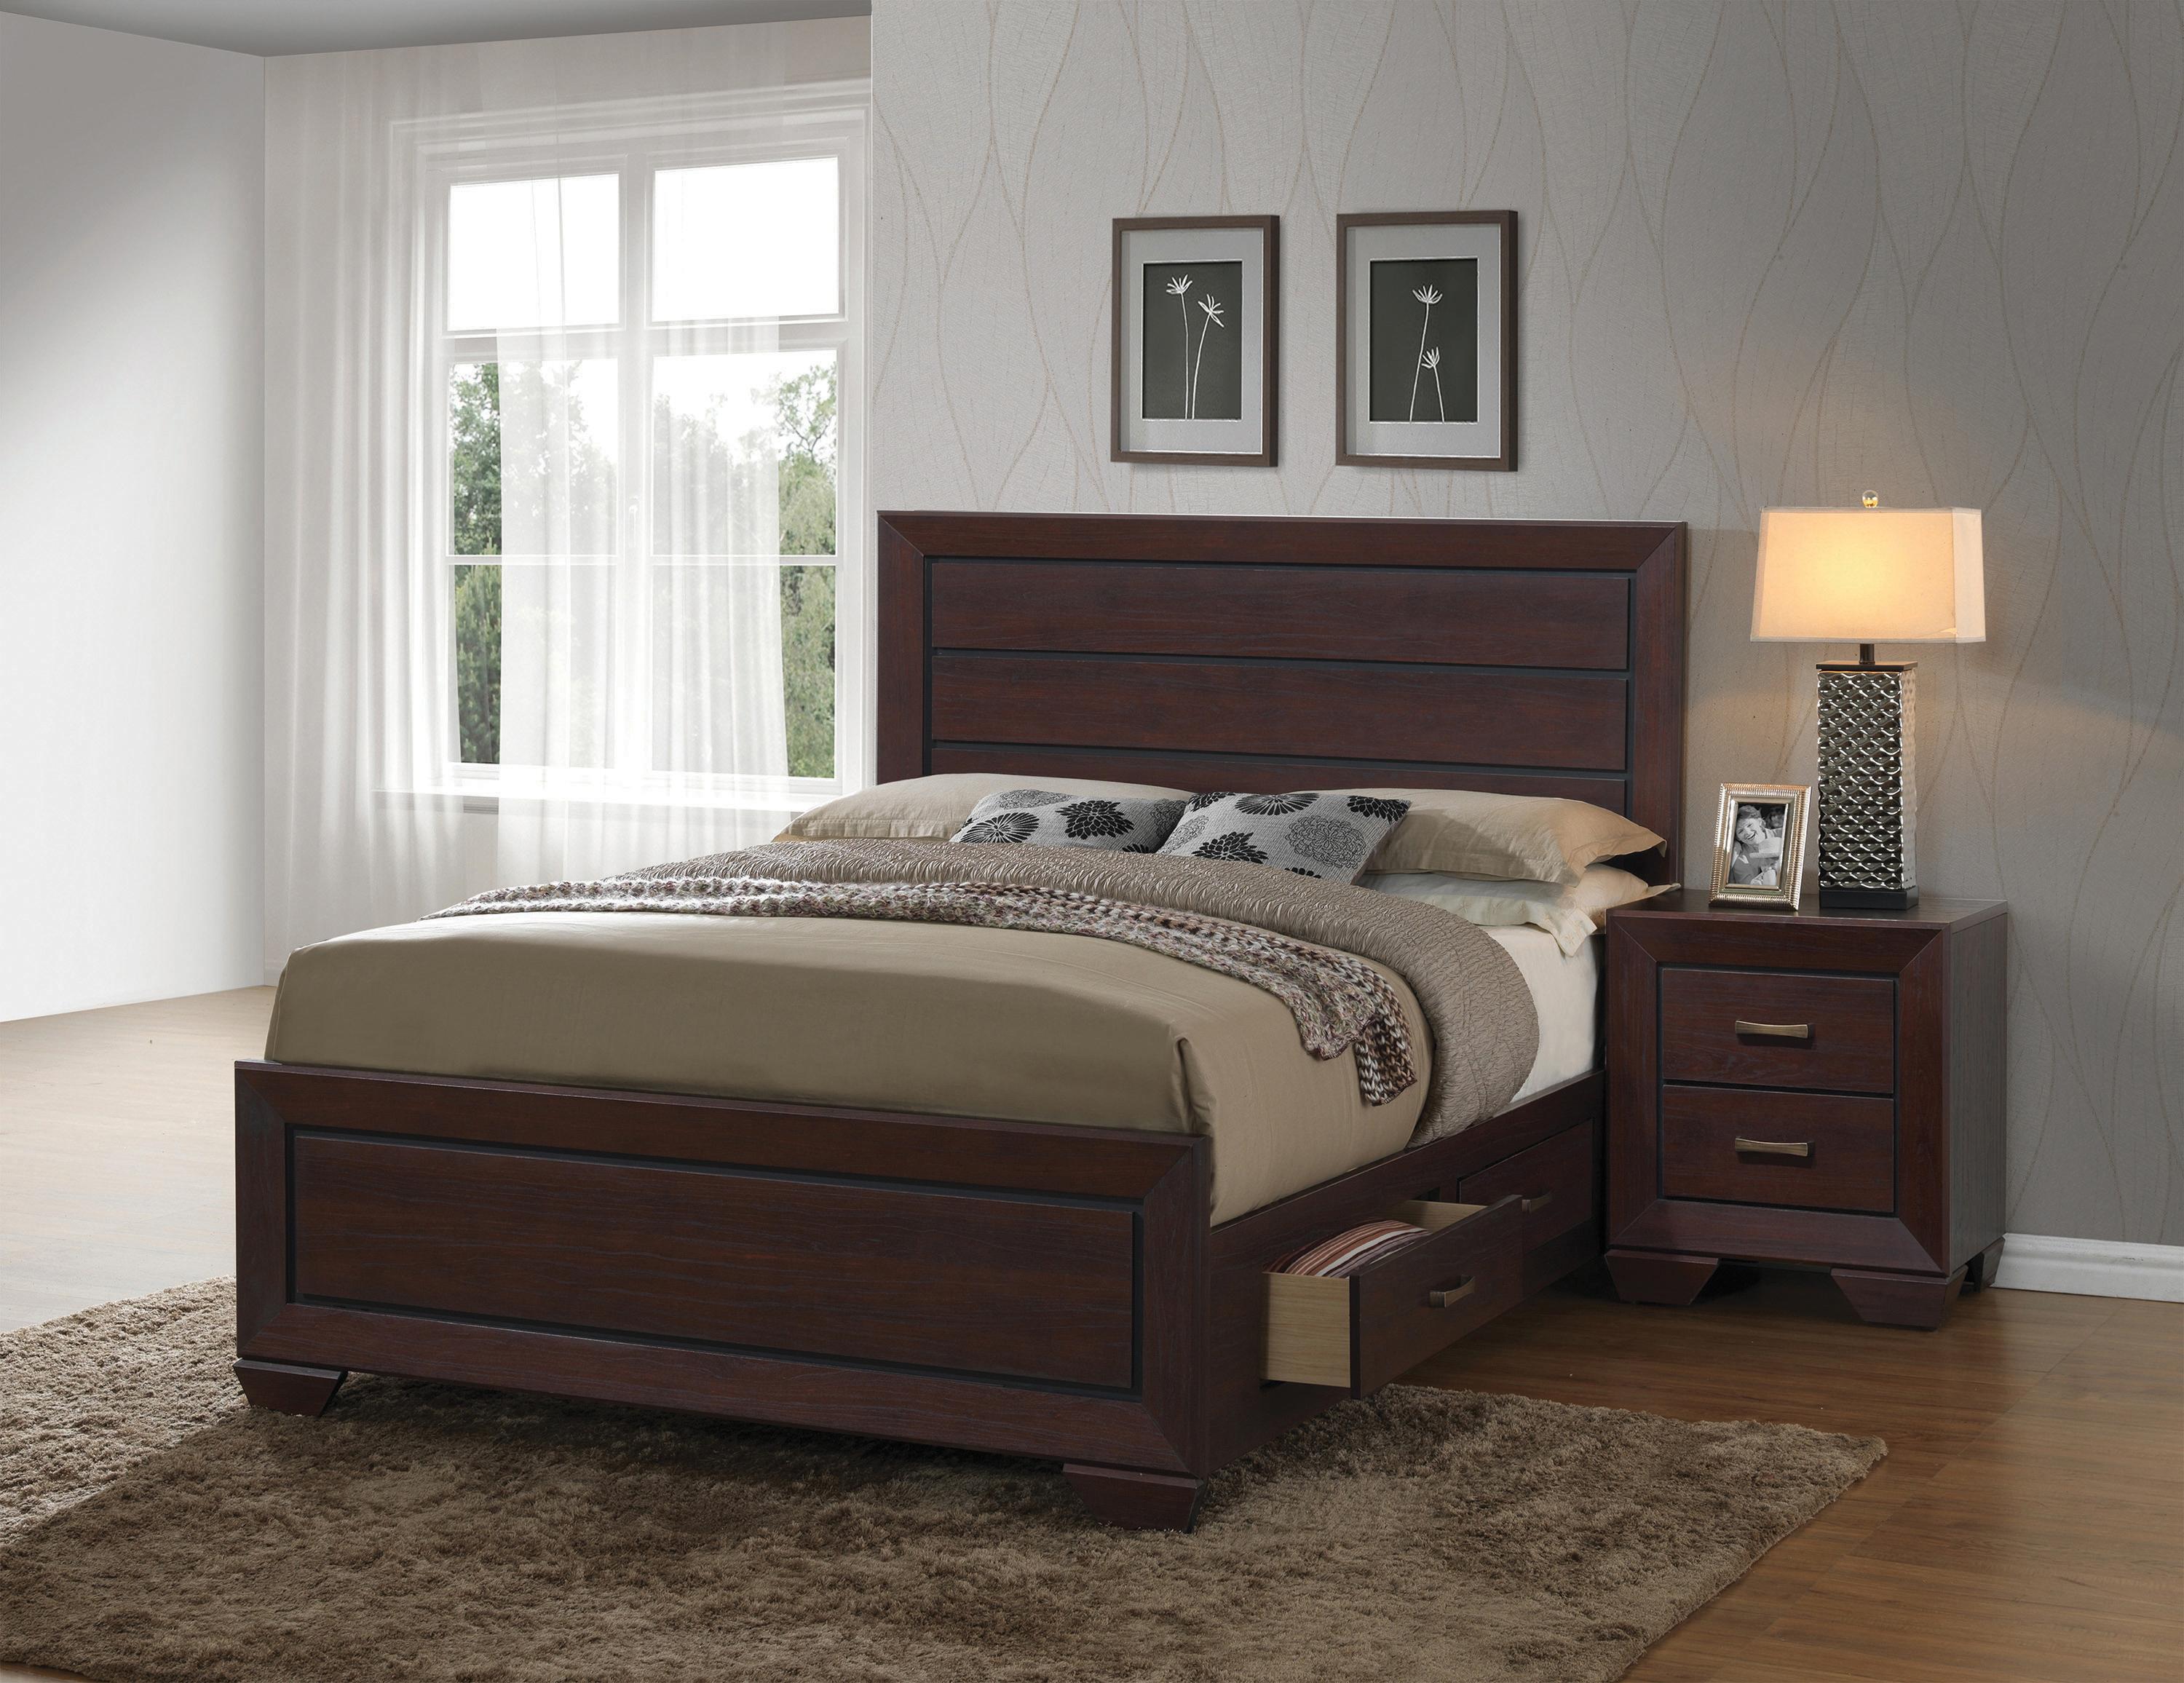 Transitional Bedroom Set 204390KW-3PC Kauffman 204390KW-3PC in Cocoa 